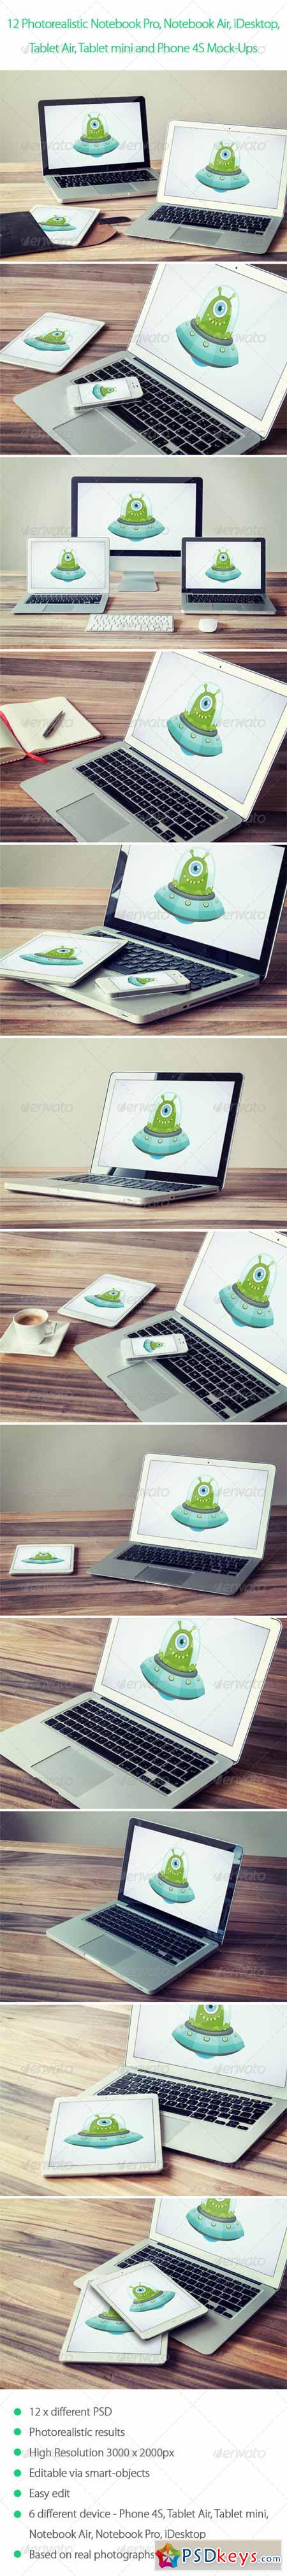 12 Photorealistic Notebook, Mobile Device Mock-Ups 6142323